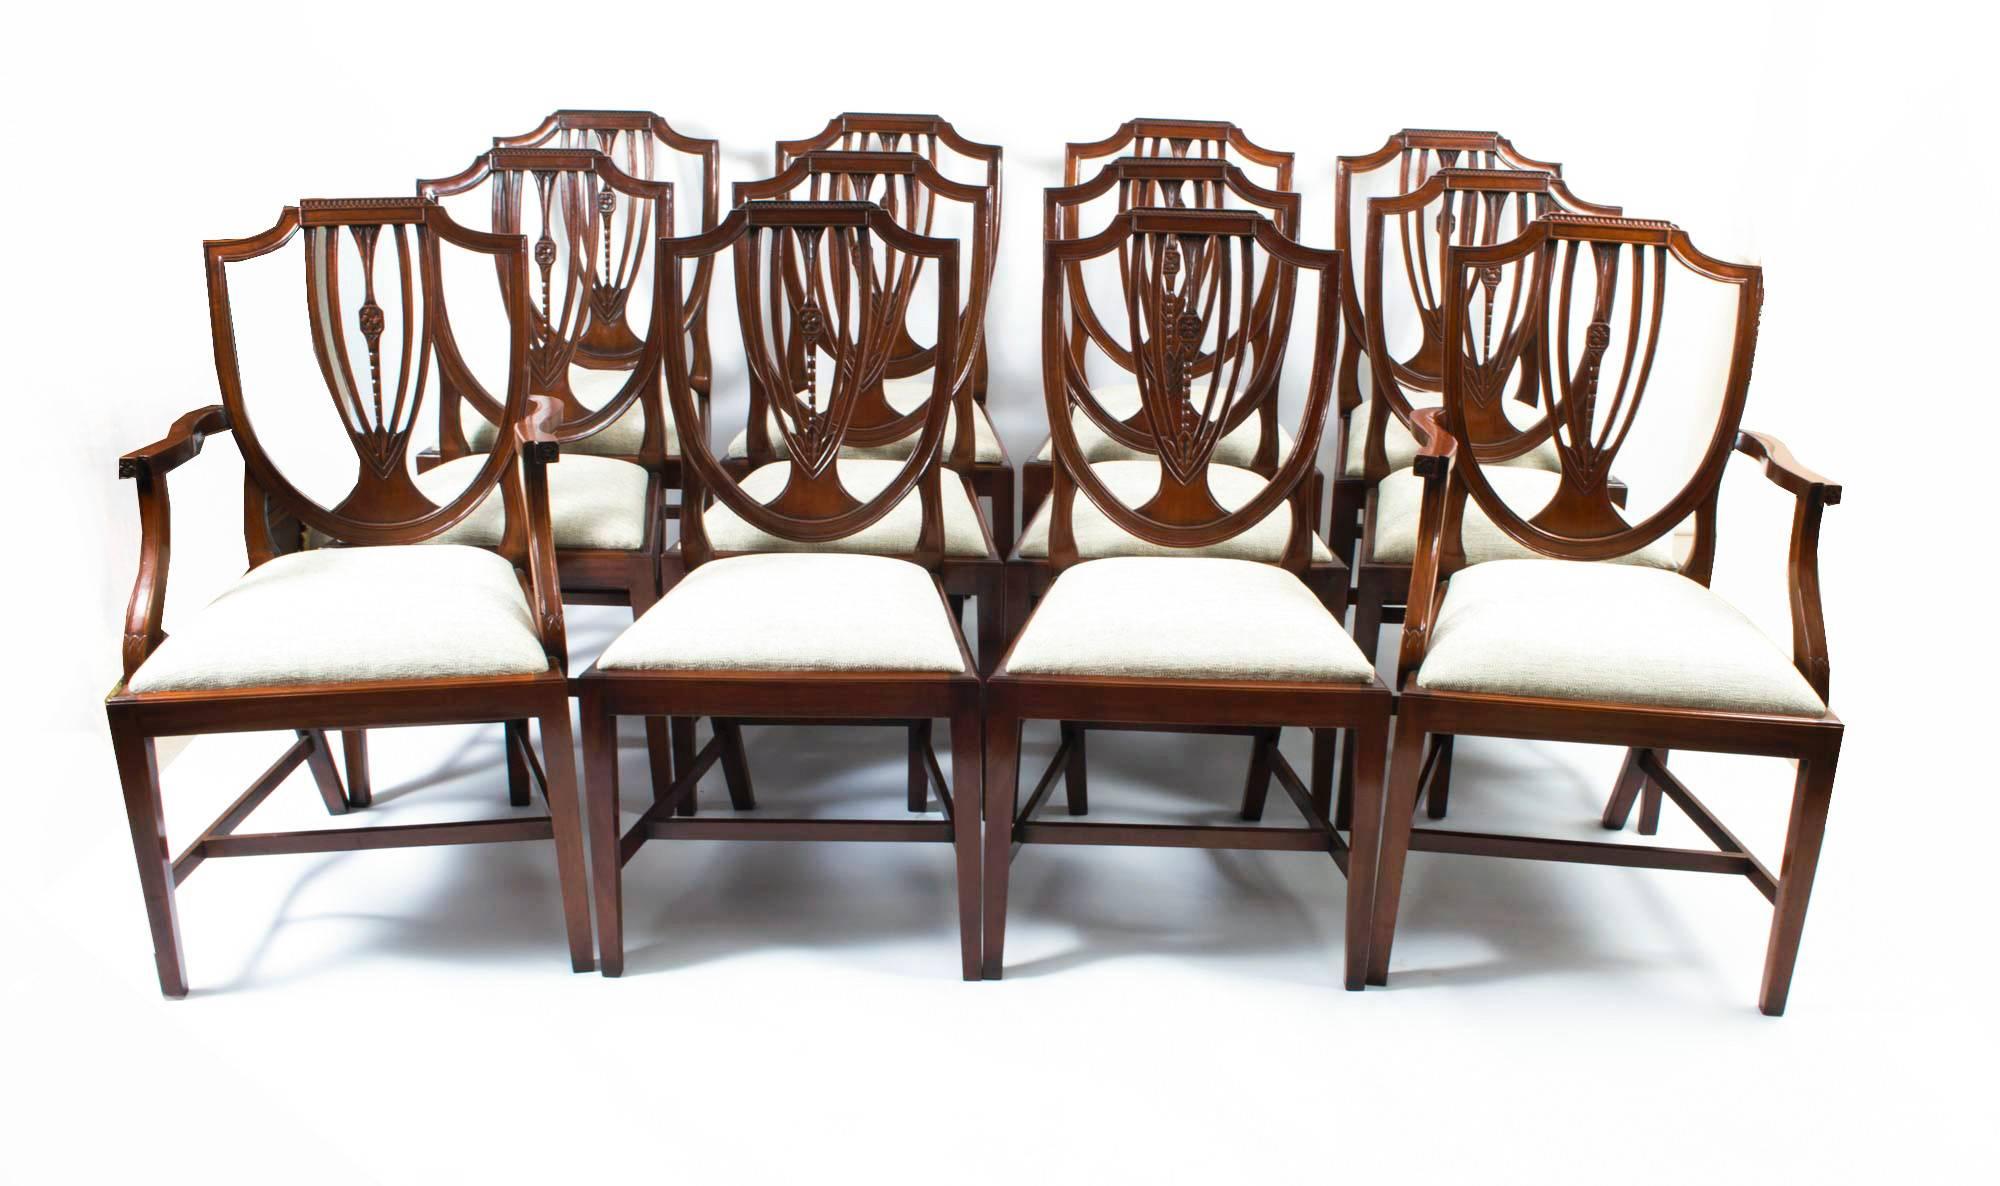 English Antique Victorian Mahogany Dining Table with 12 Shield-Back Chairs